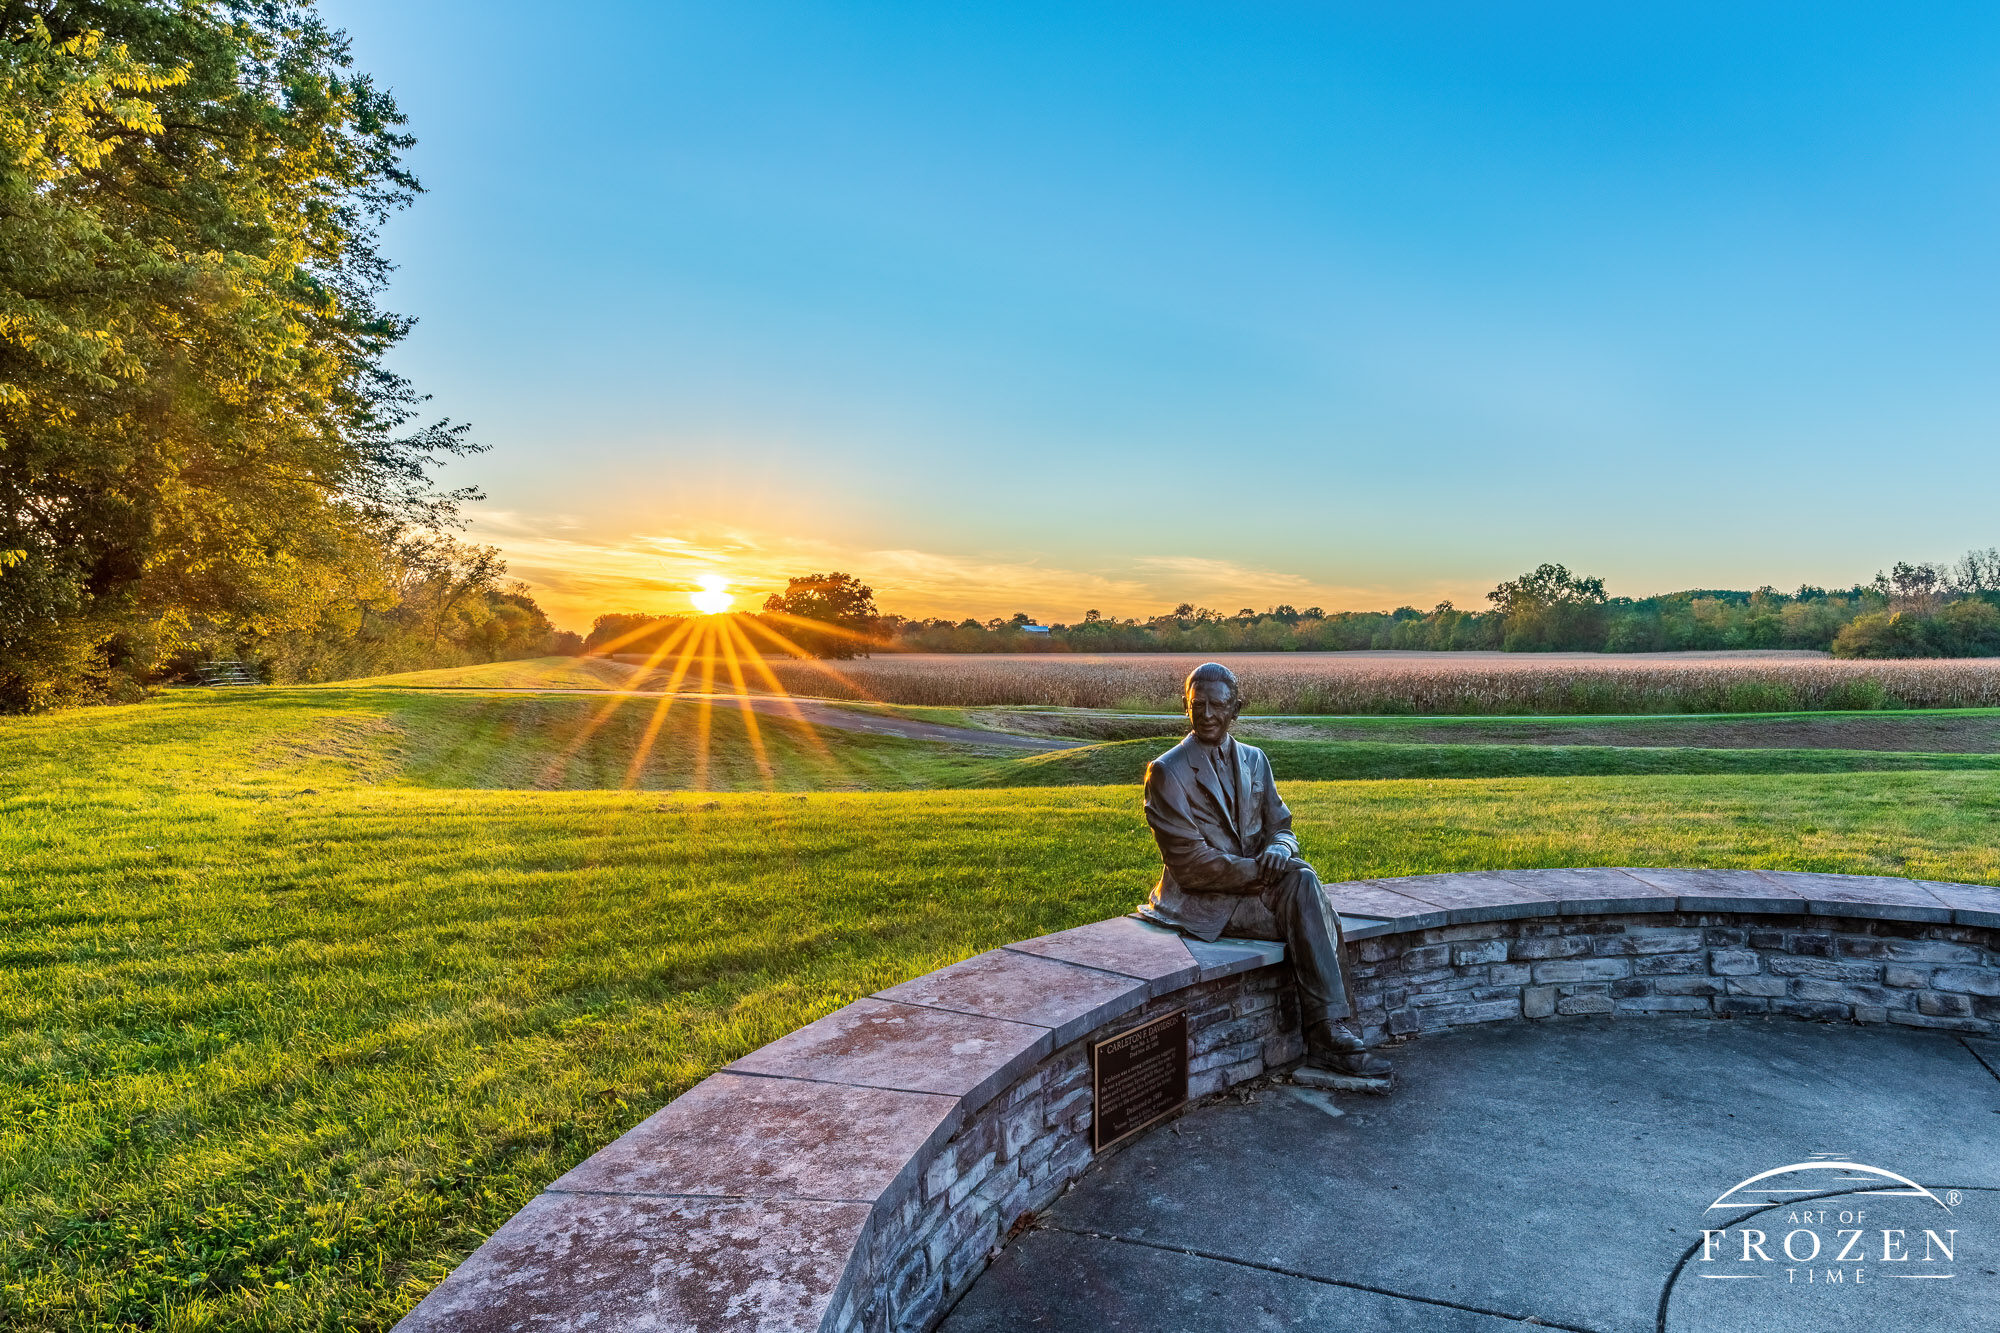 A bronze sculpture of Carleton F. Davidson sitting on a small wall during a fall sunset that cast golden light over the historical education center holding his name